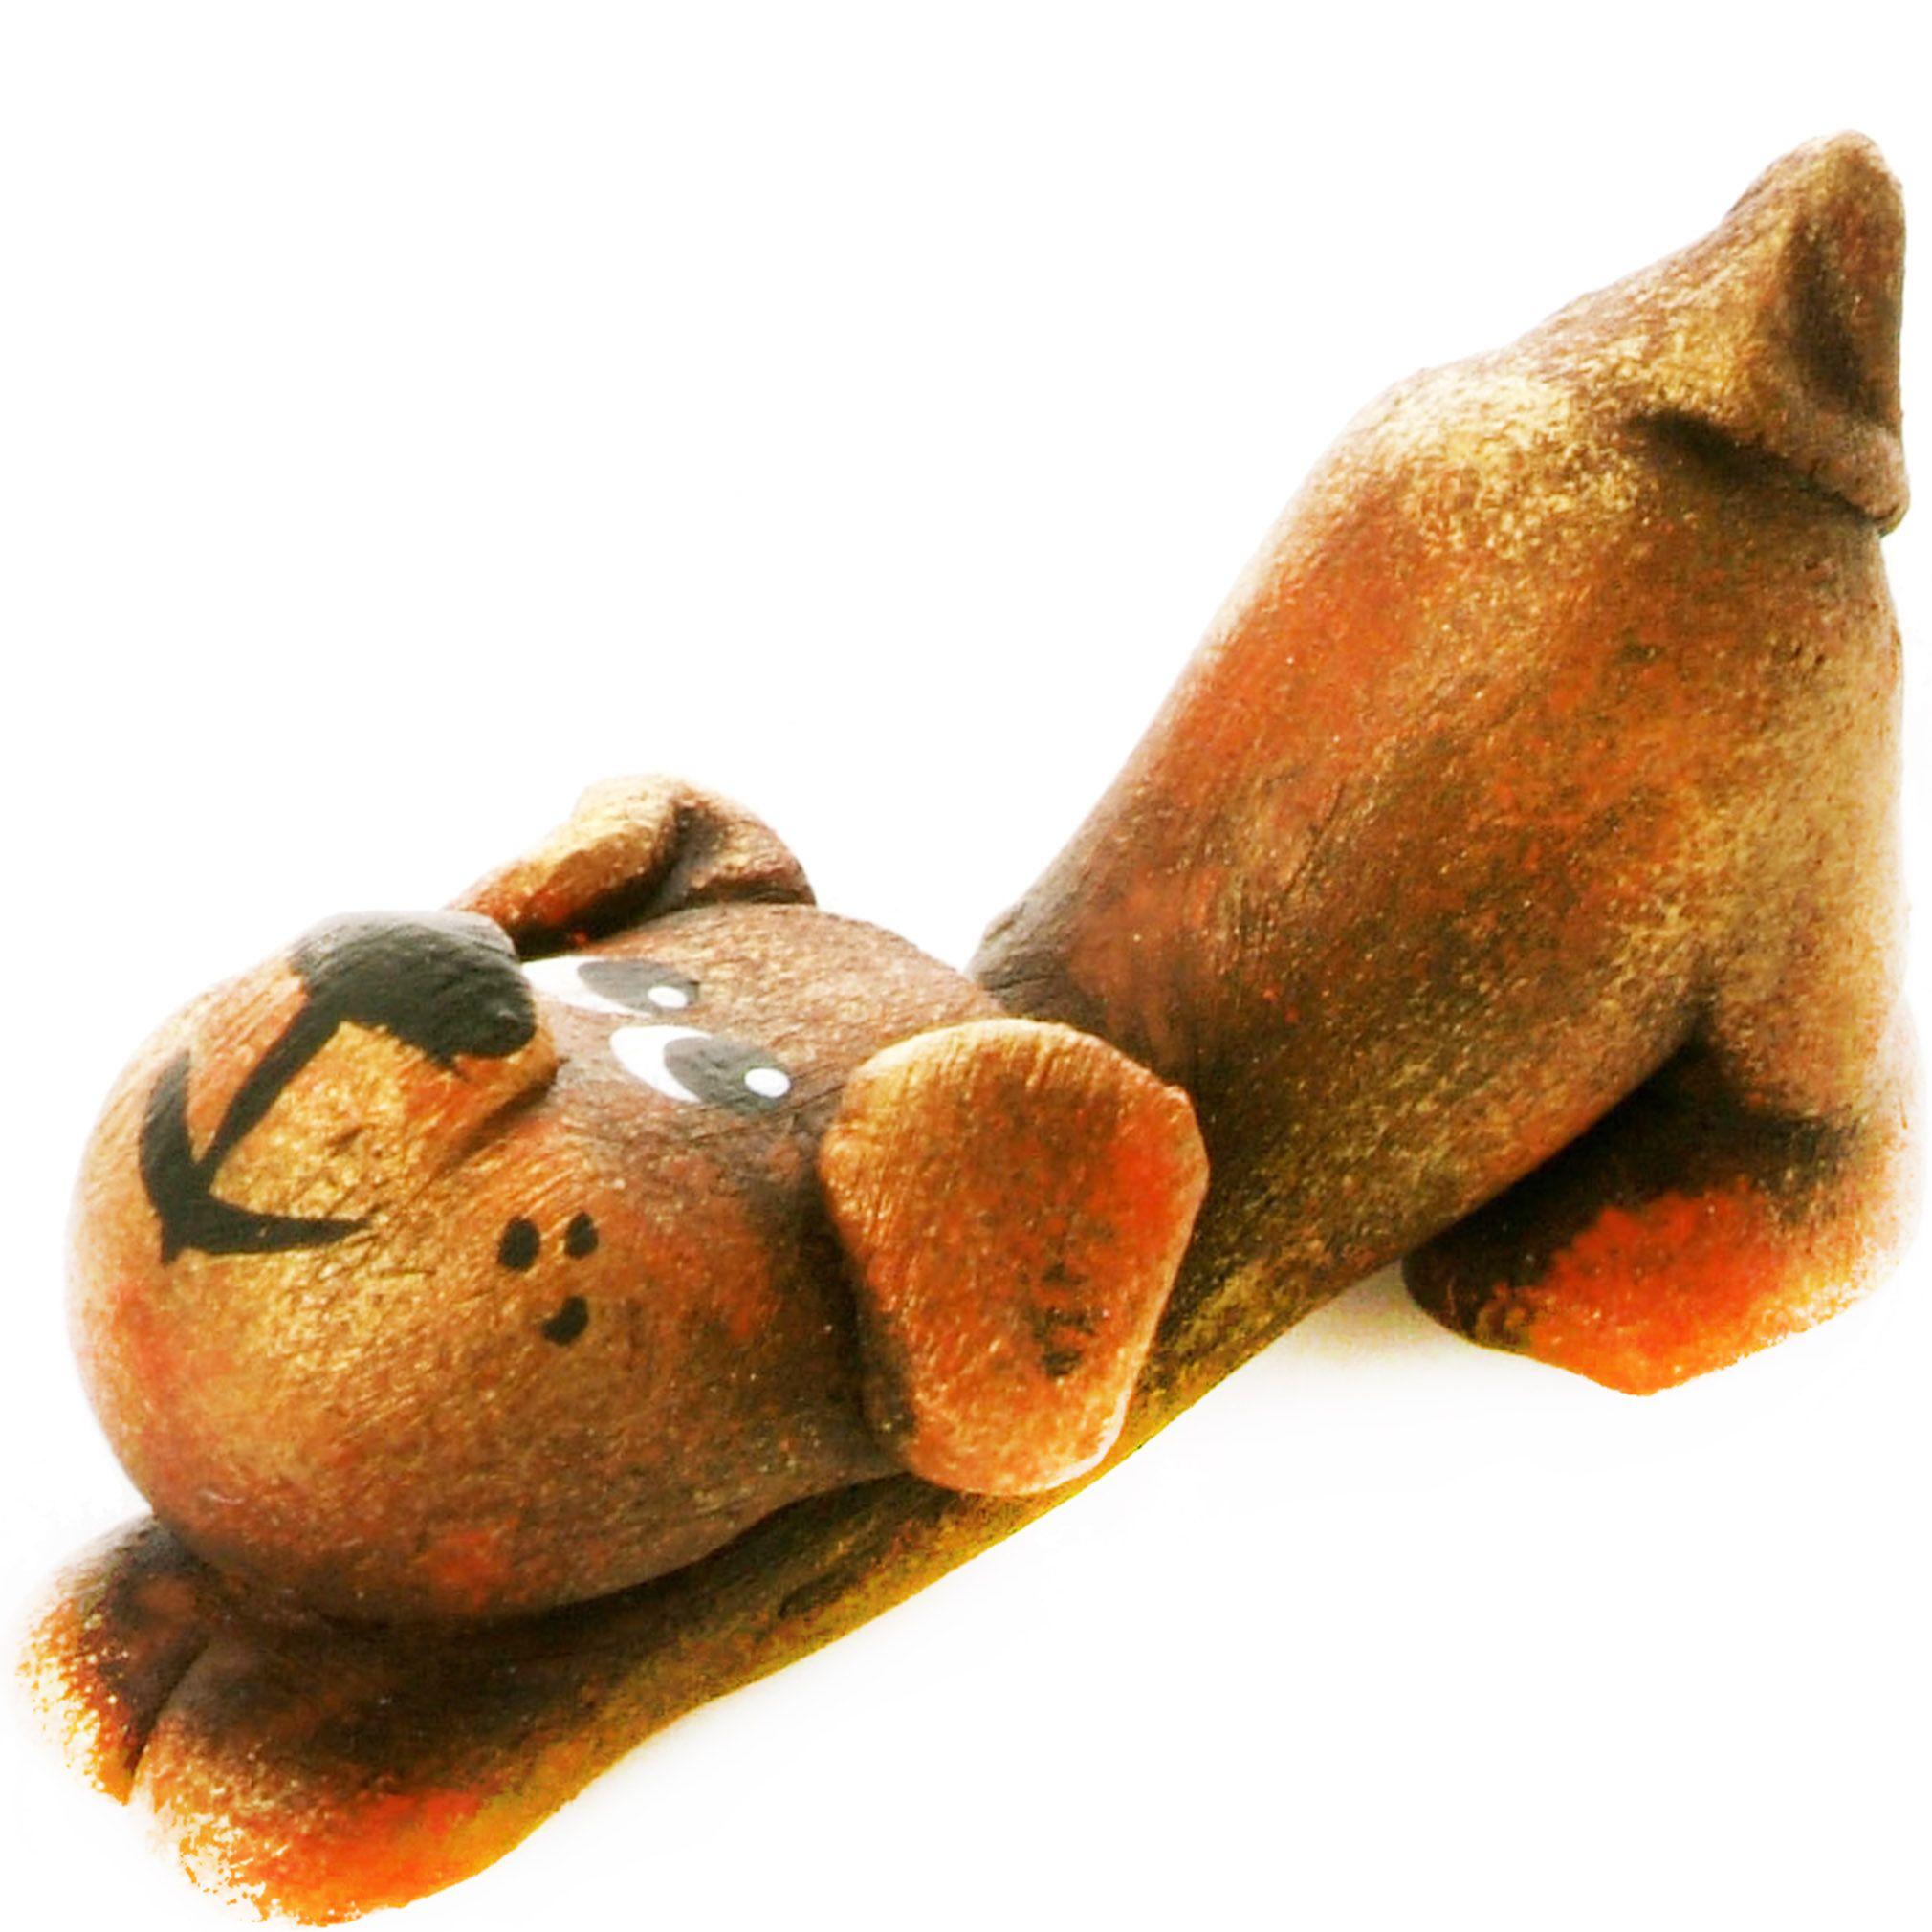 Pet in a Box | Ceramic Animal Gift for Kids | Brown Puppy Dog